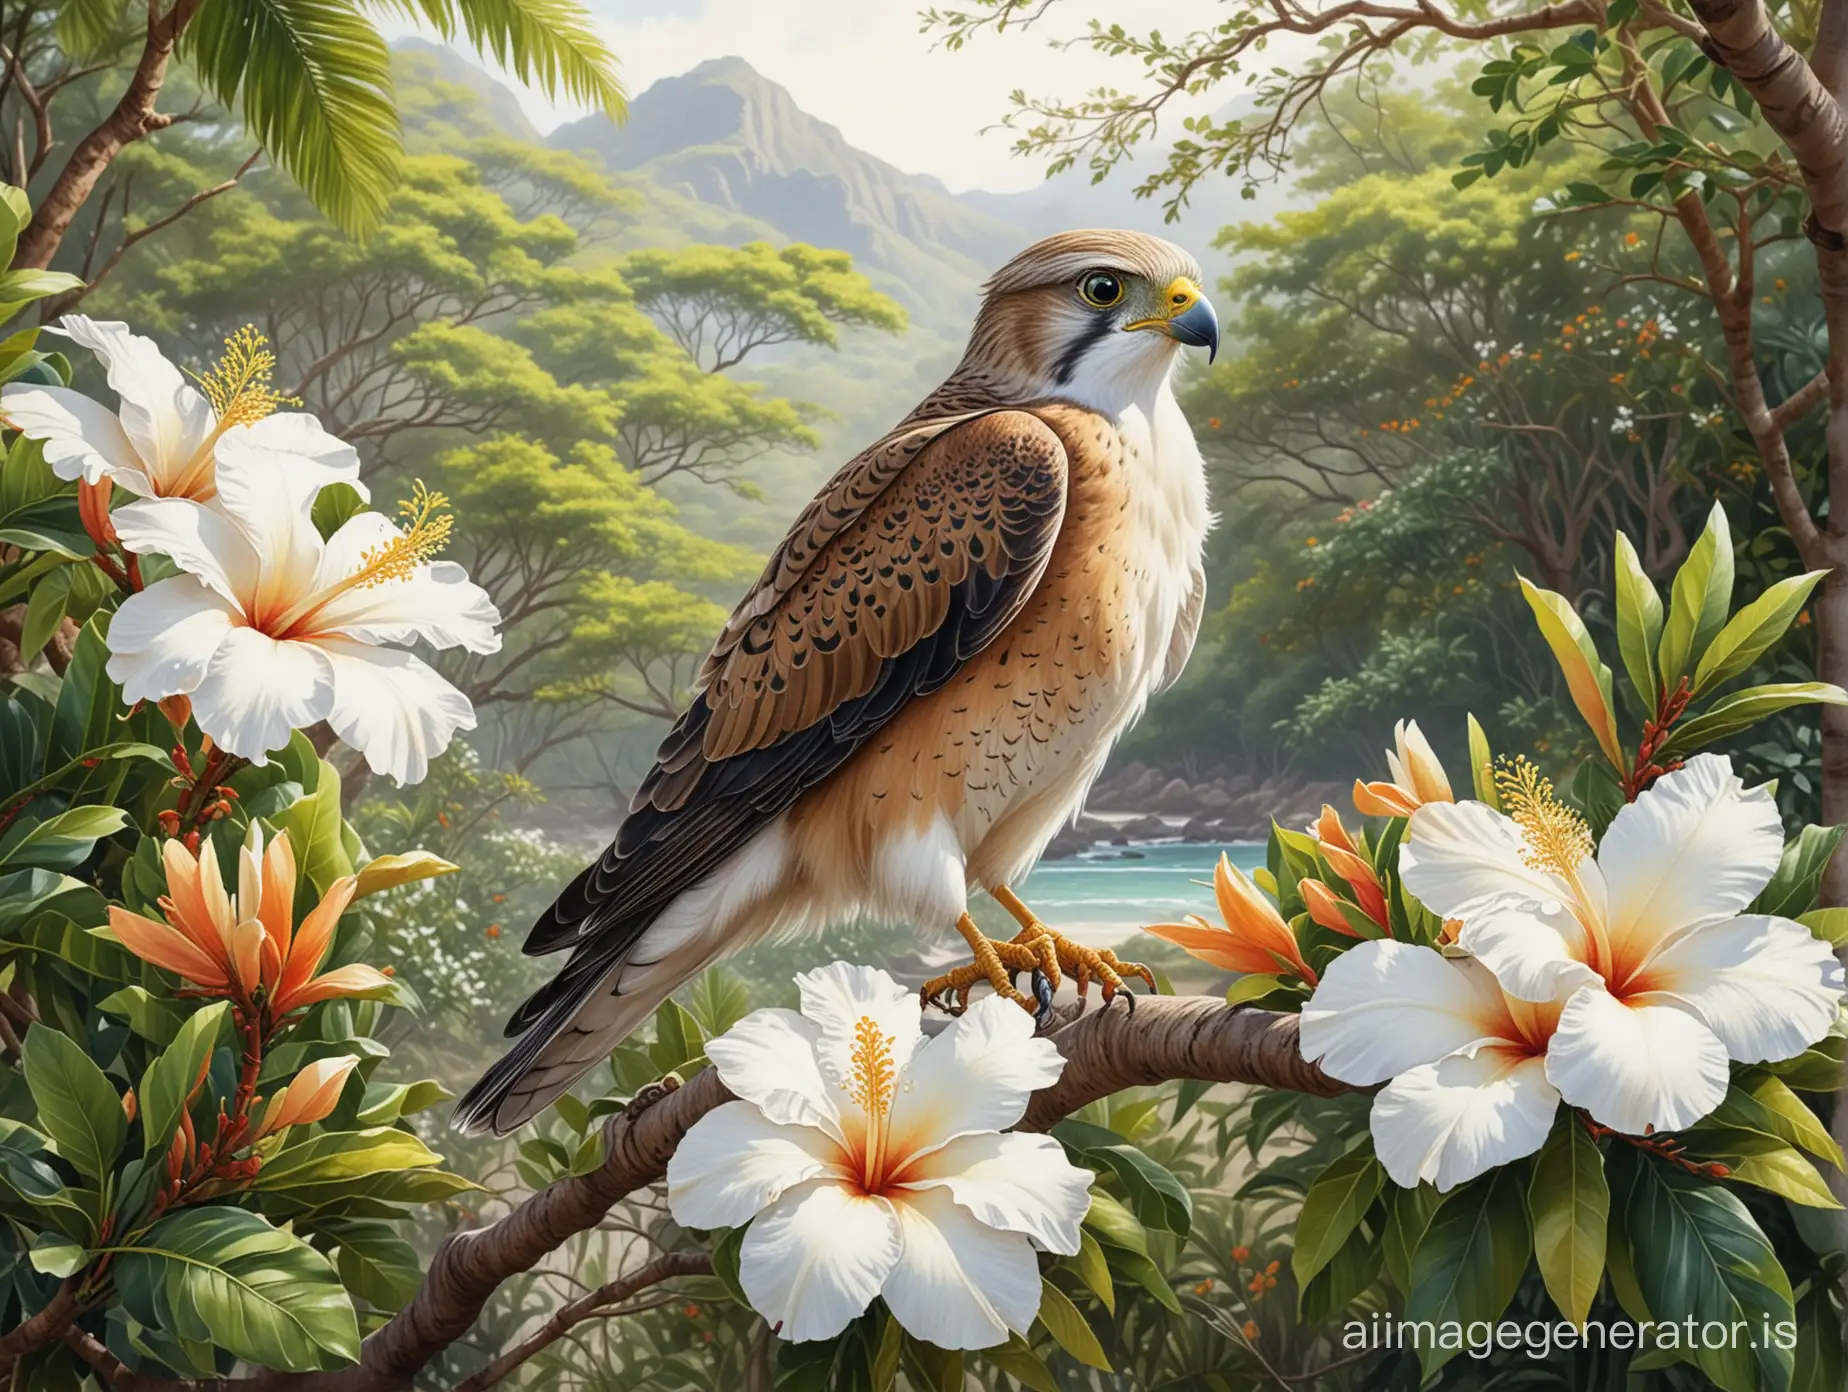 Mauritius-Tropical-Beach-Landscape-with-Kestrel-Bird-and-Exotic-Flora